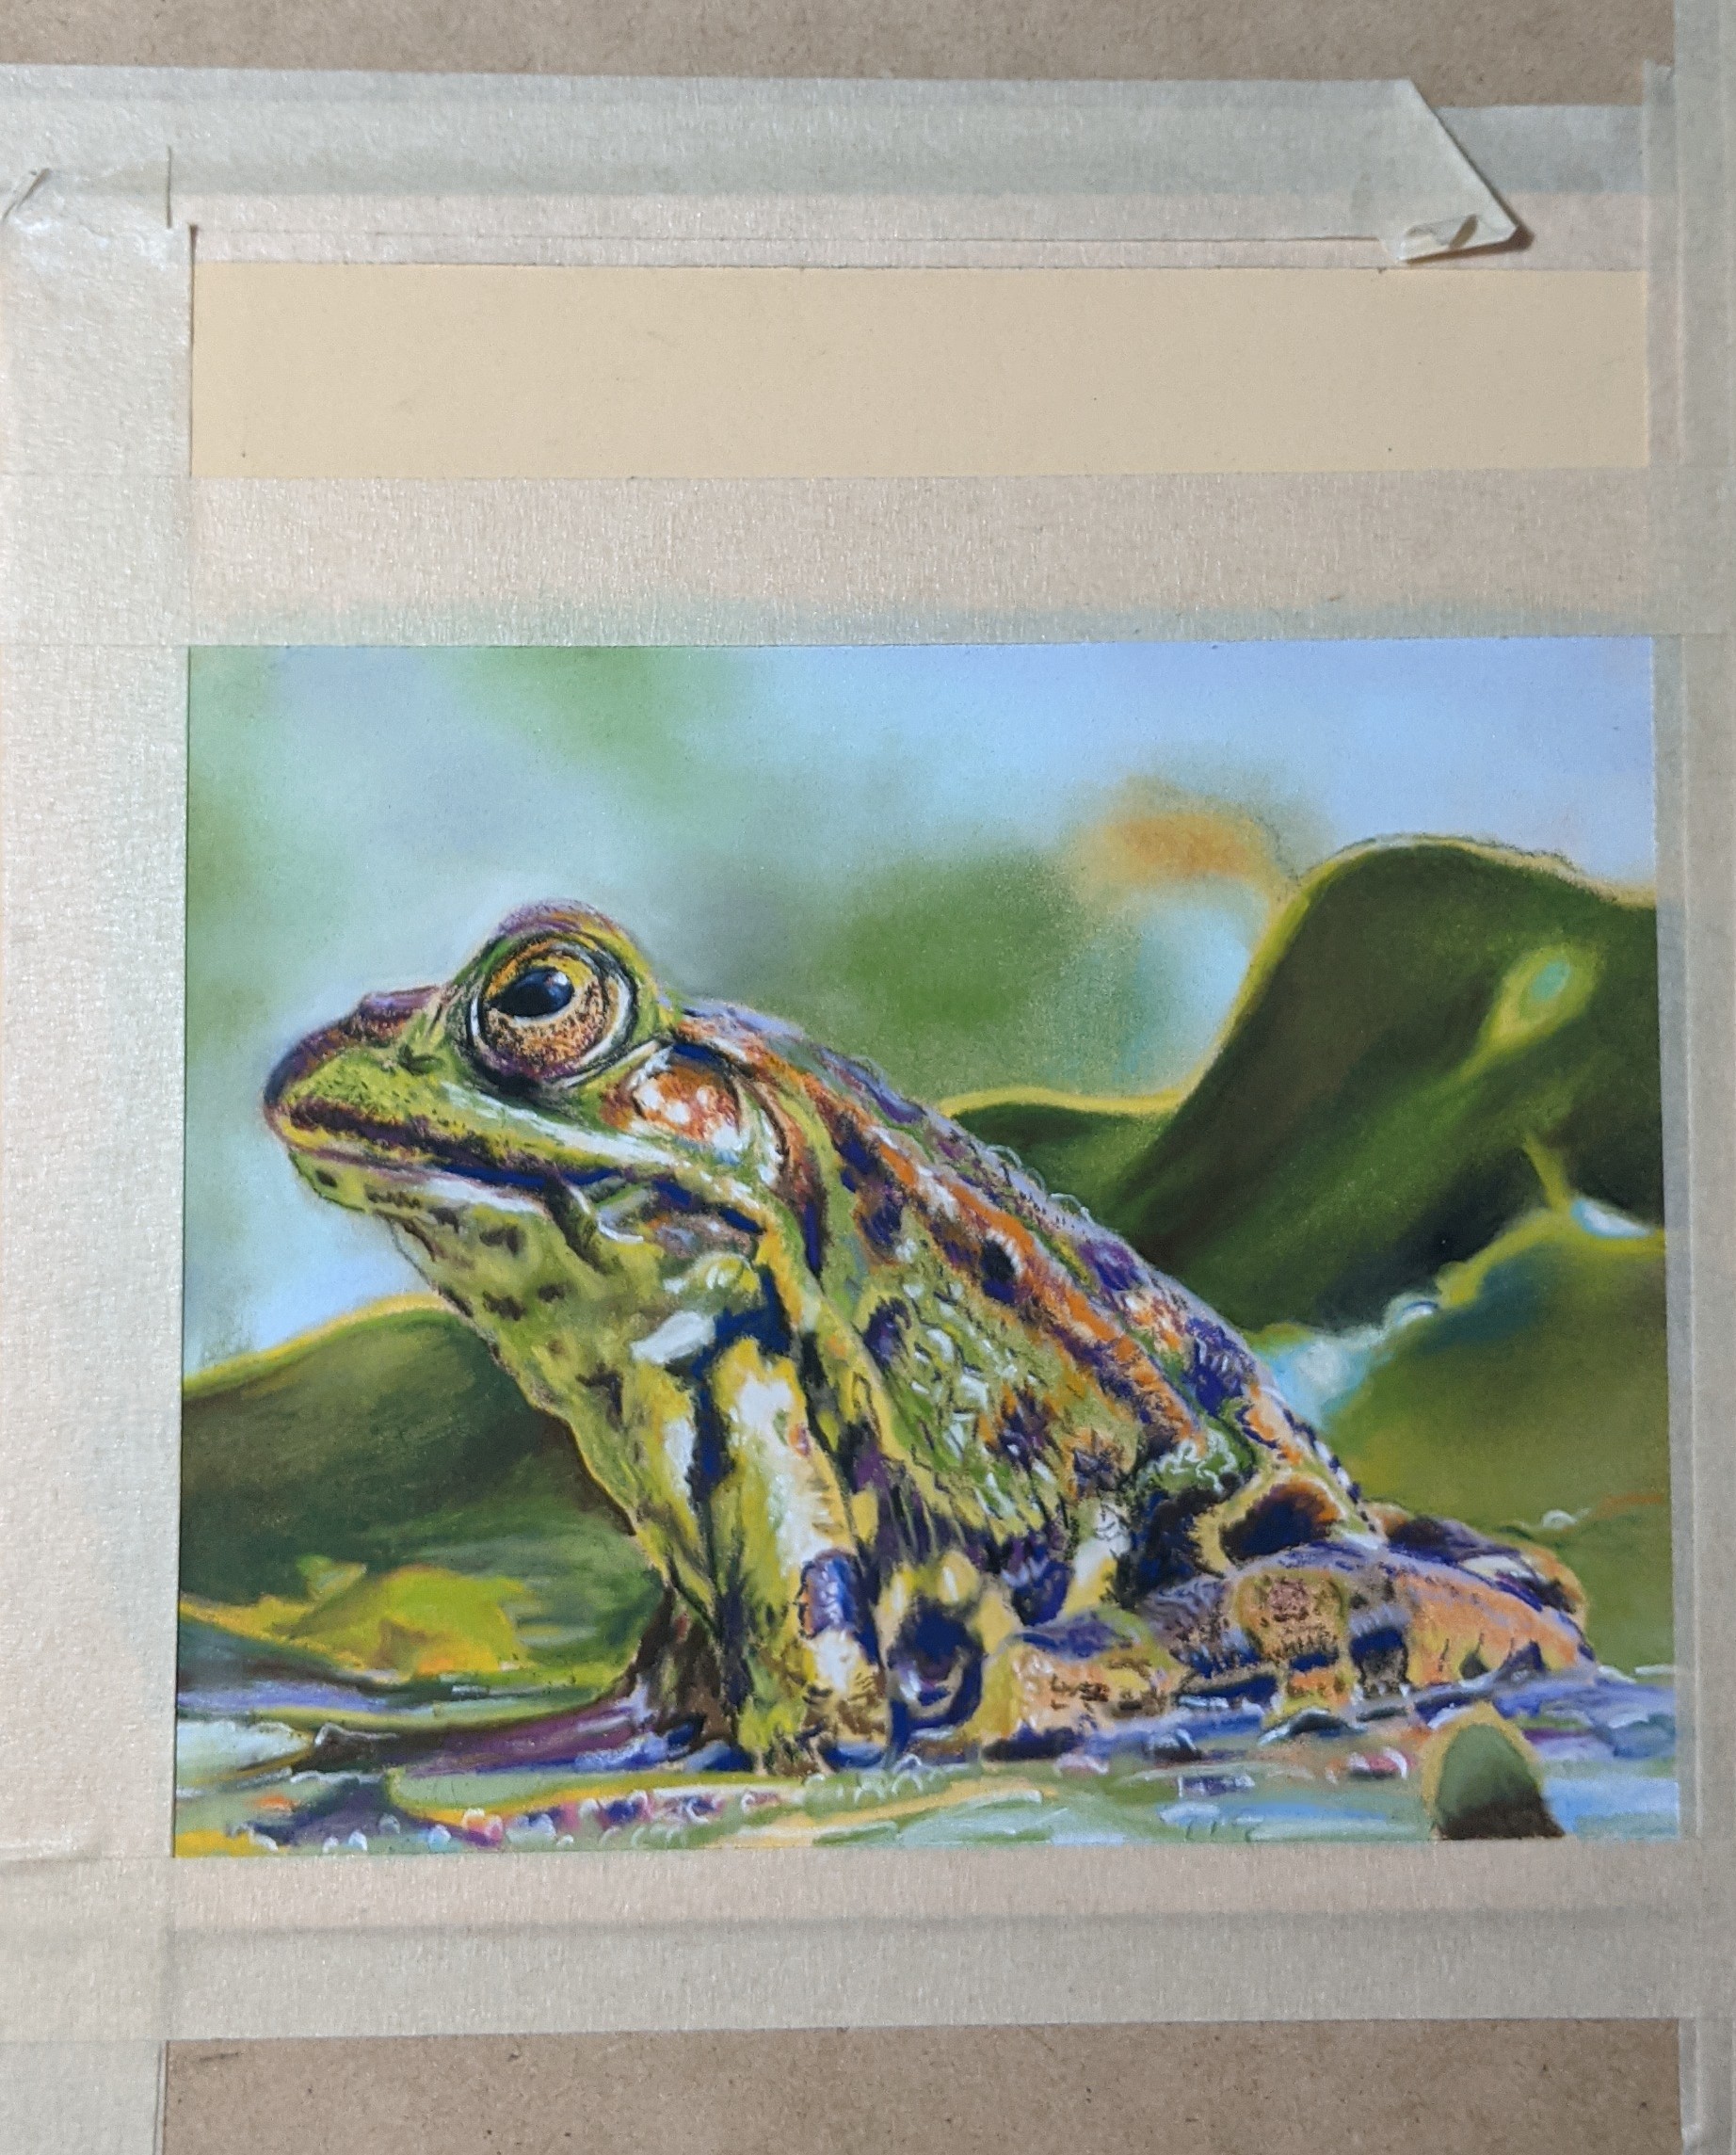 The image shows a pastel rendered image of a frog contemplating life taped to an art board by Dianne Horvath Art Trails Tasmania